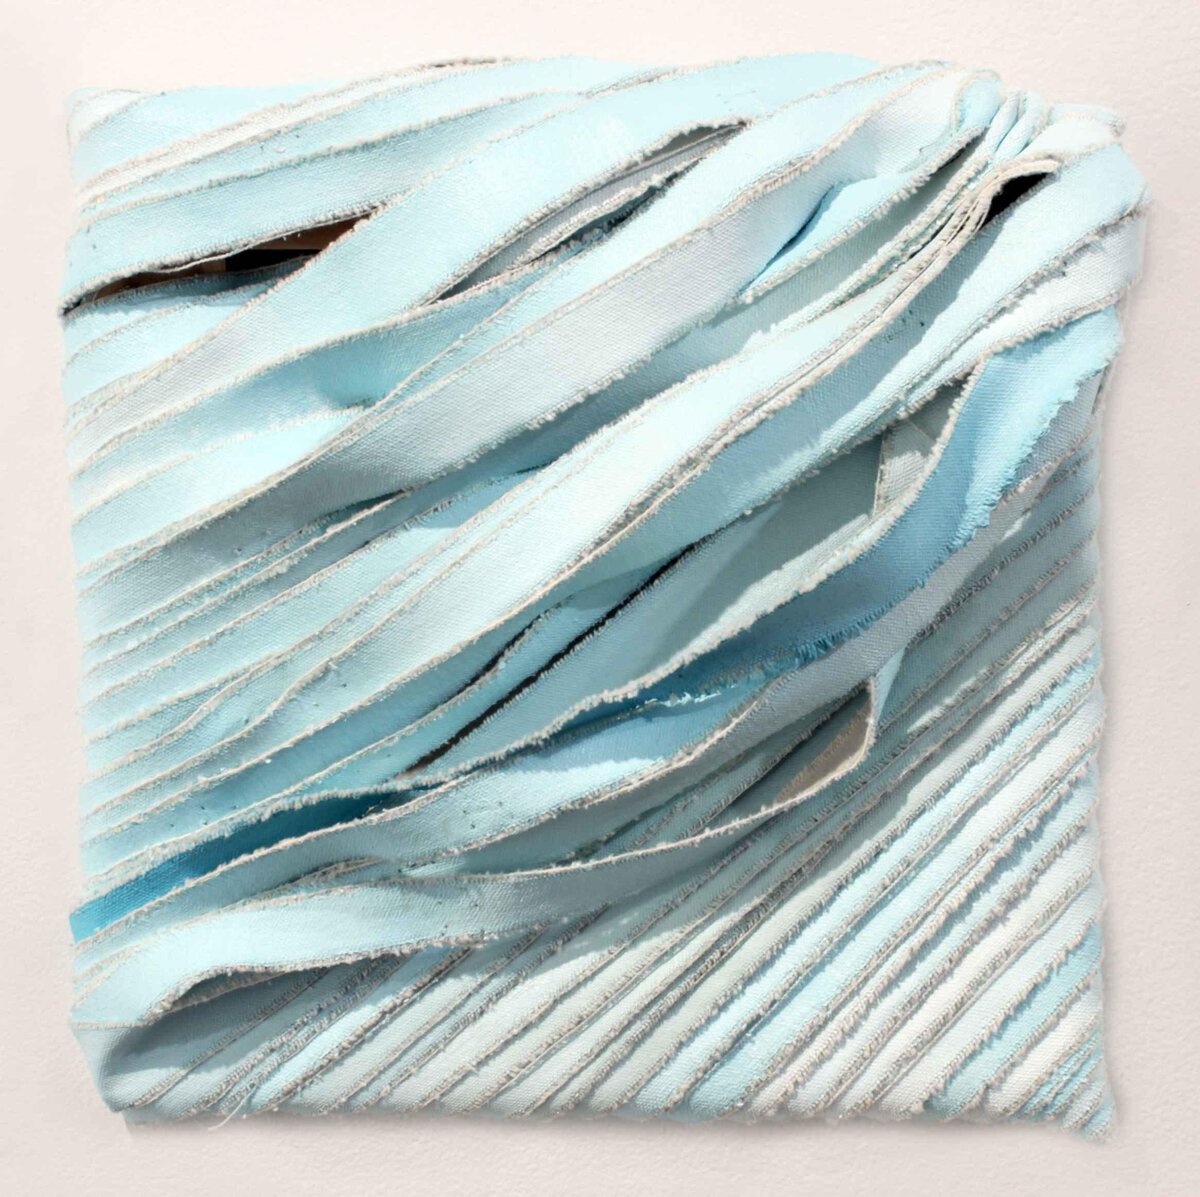 Jean Alexander Frater; Teal to White Loose and Taut; 2016